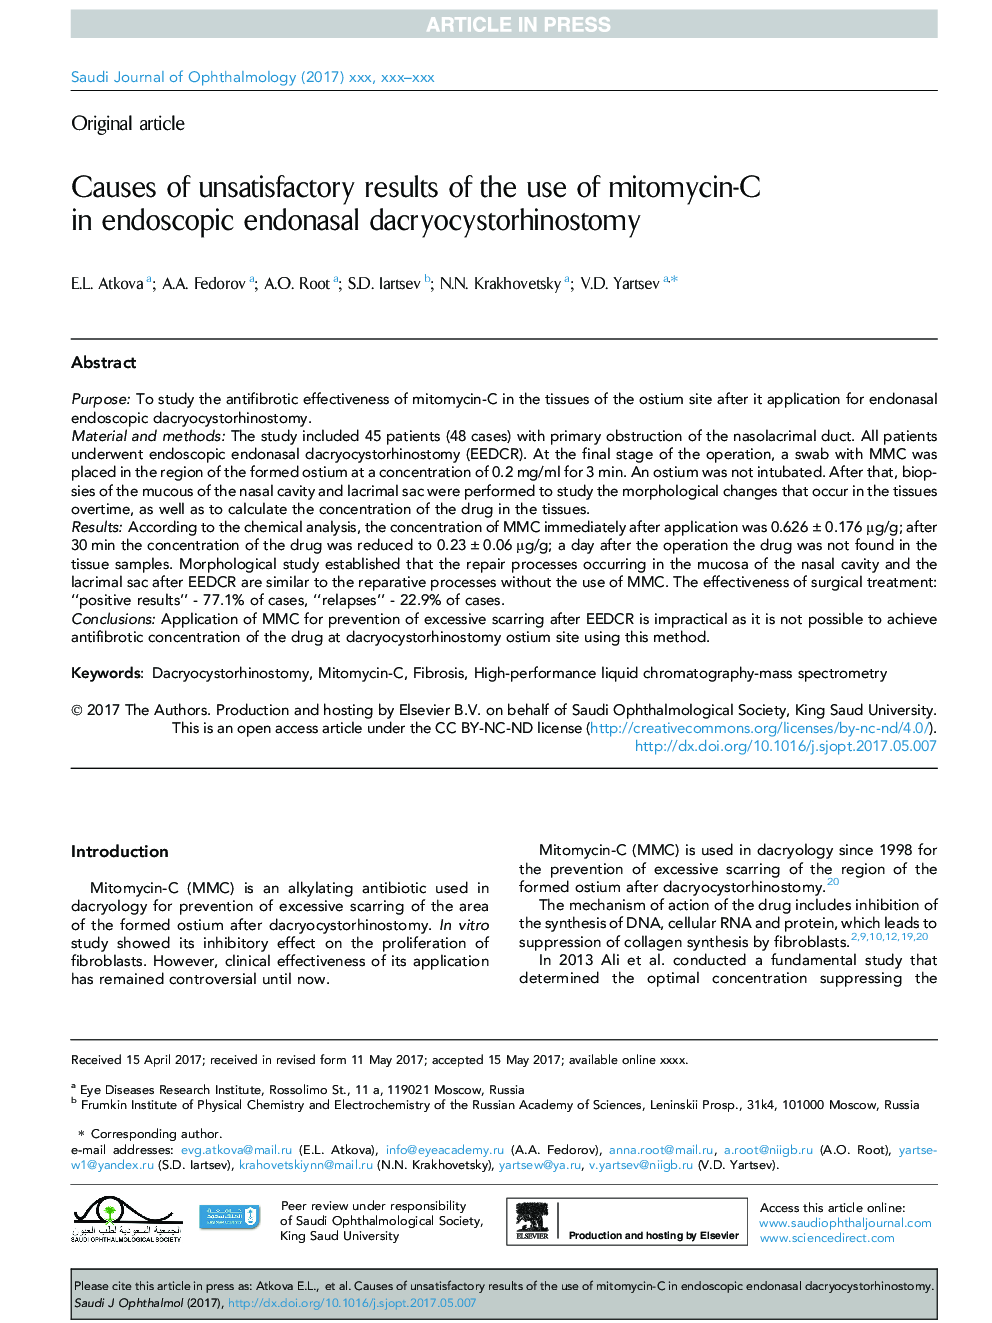 Causes of unsatisfactory results of the use of mitomycin-C in endoscopic endonasal dacryocystorhinostomy